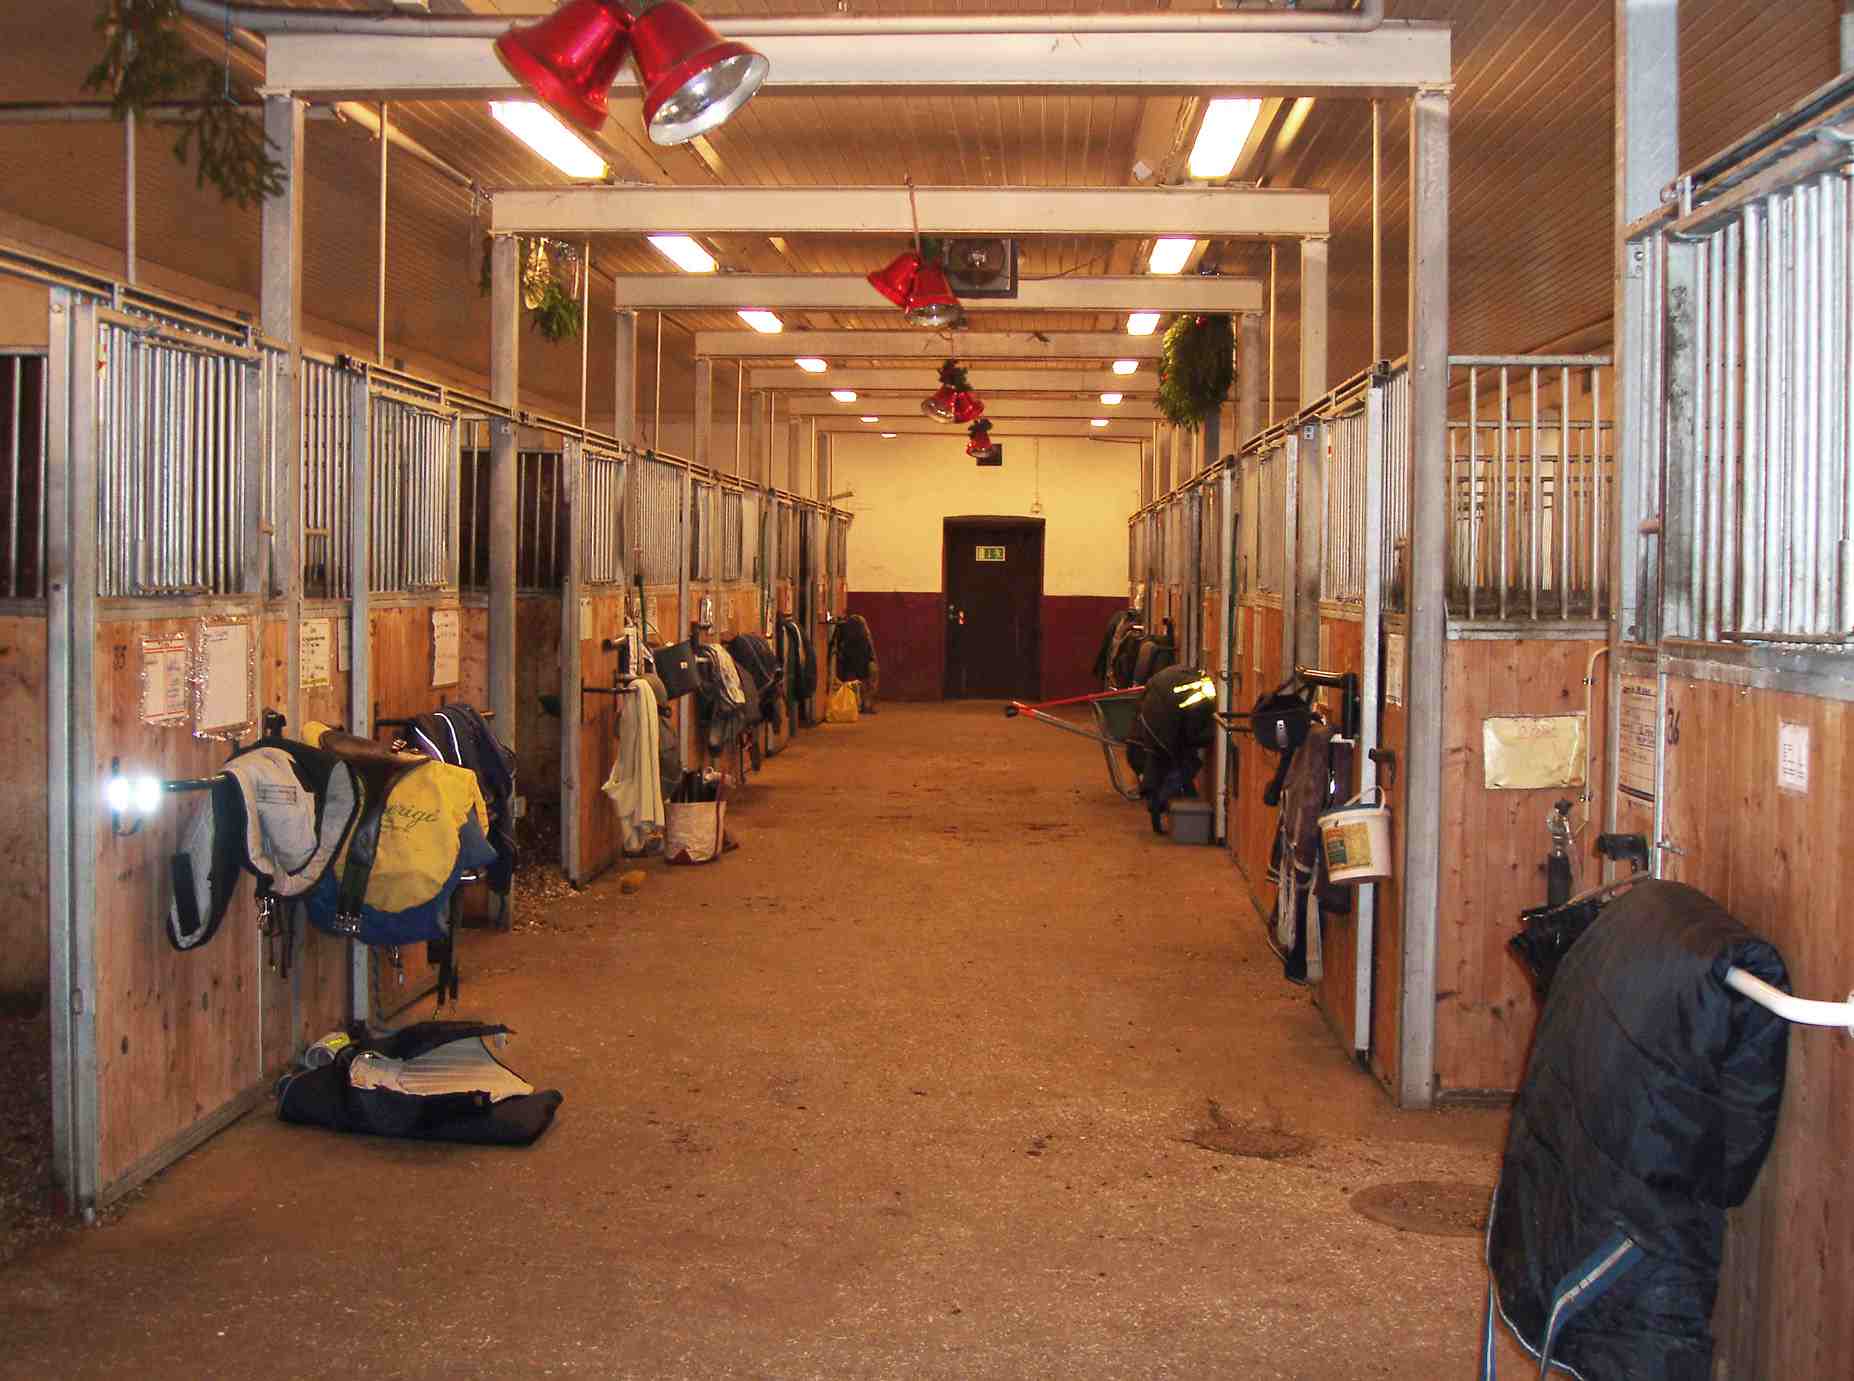 Inside of a stable showing aisle and tack outside of stalls.